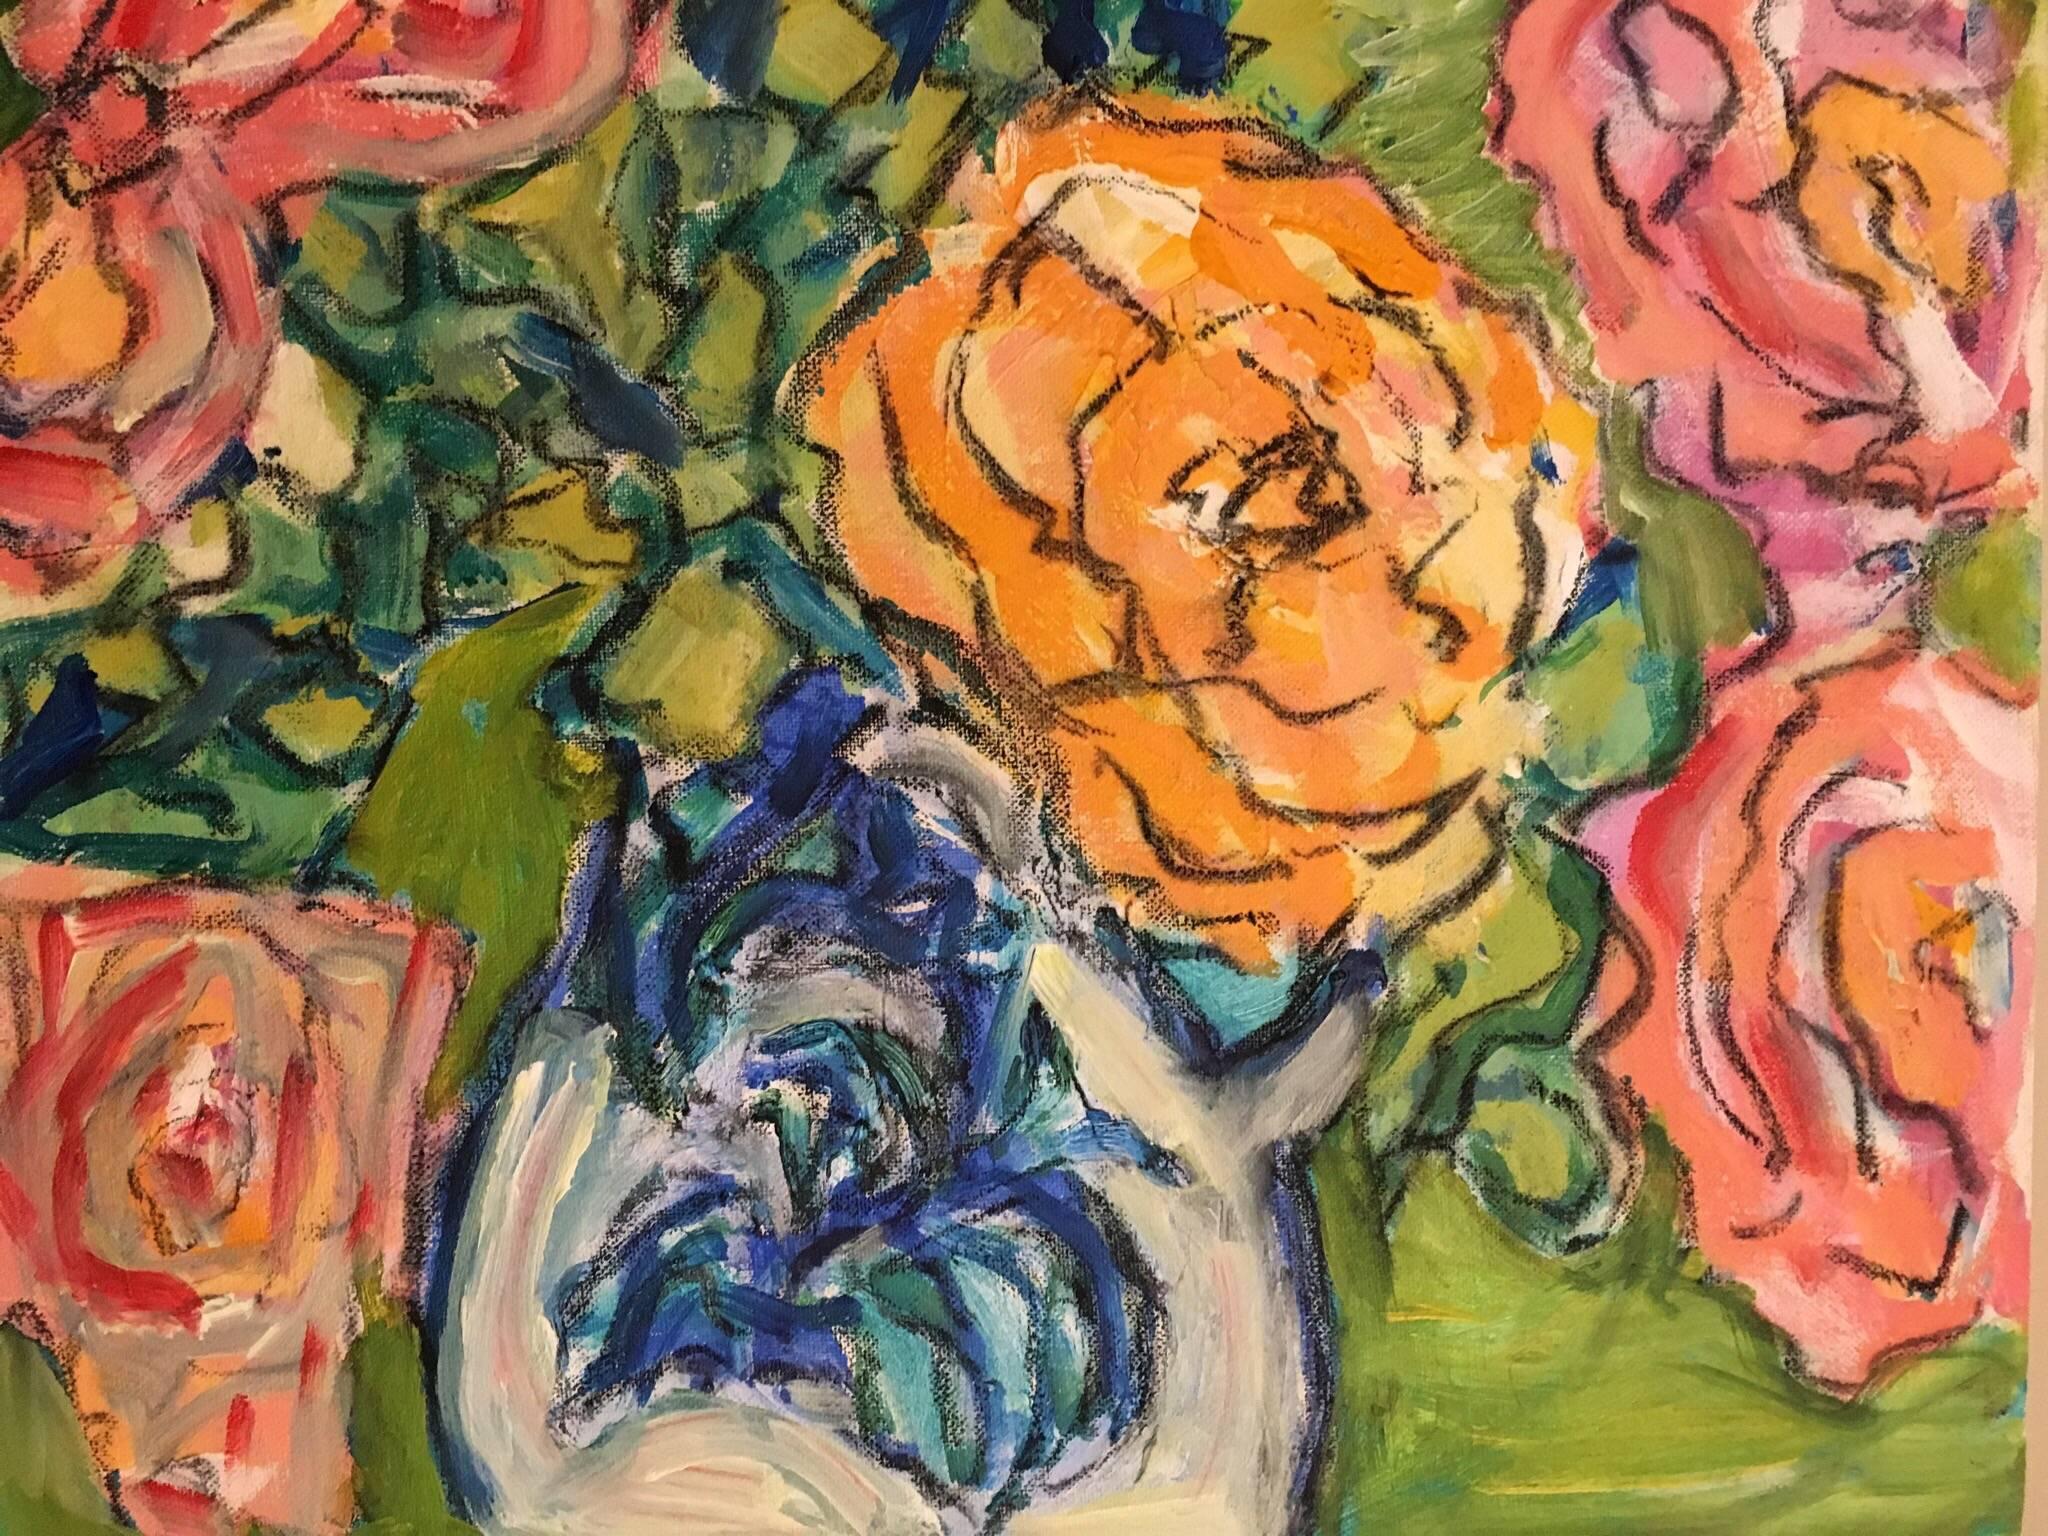 Peonies in a Vase, Impressionist Style, Bright Colours
by Pamela Cawley, British 20th century
oil painting on canvas, unframed
canvas: 15 x 18 inches 

Stunning original Impressionist oil painting by the 20th century British artist, Pamela Cawley.